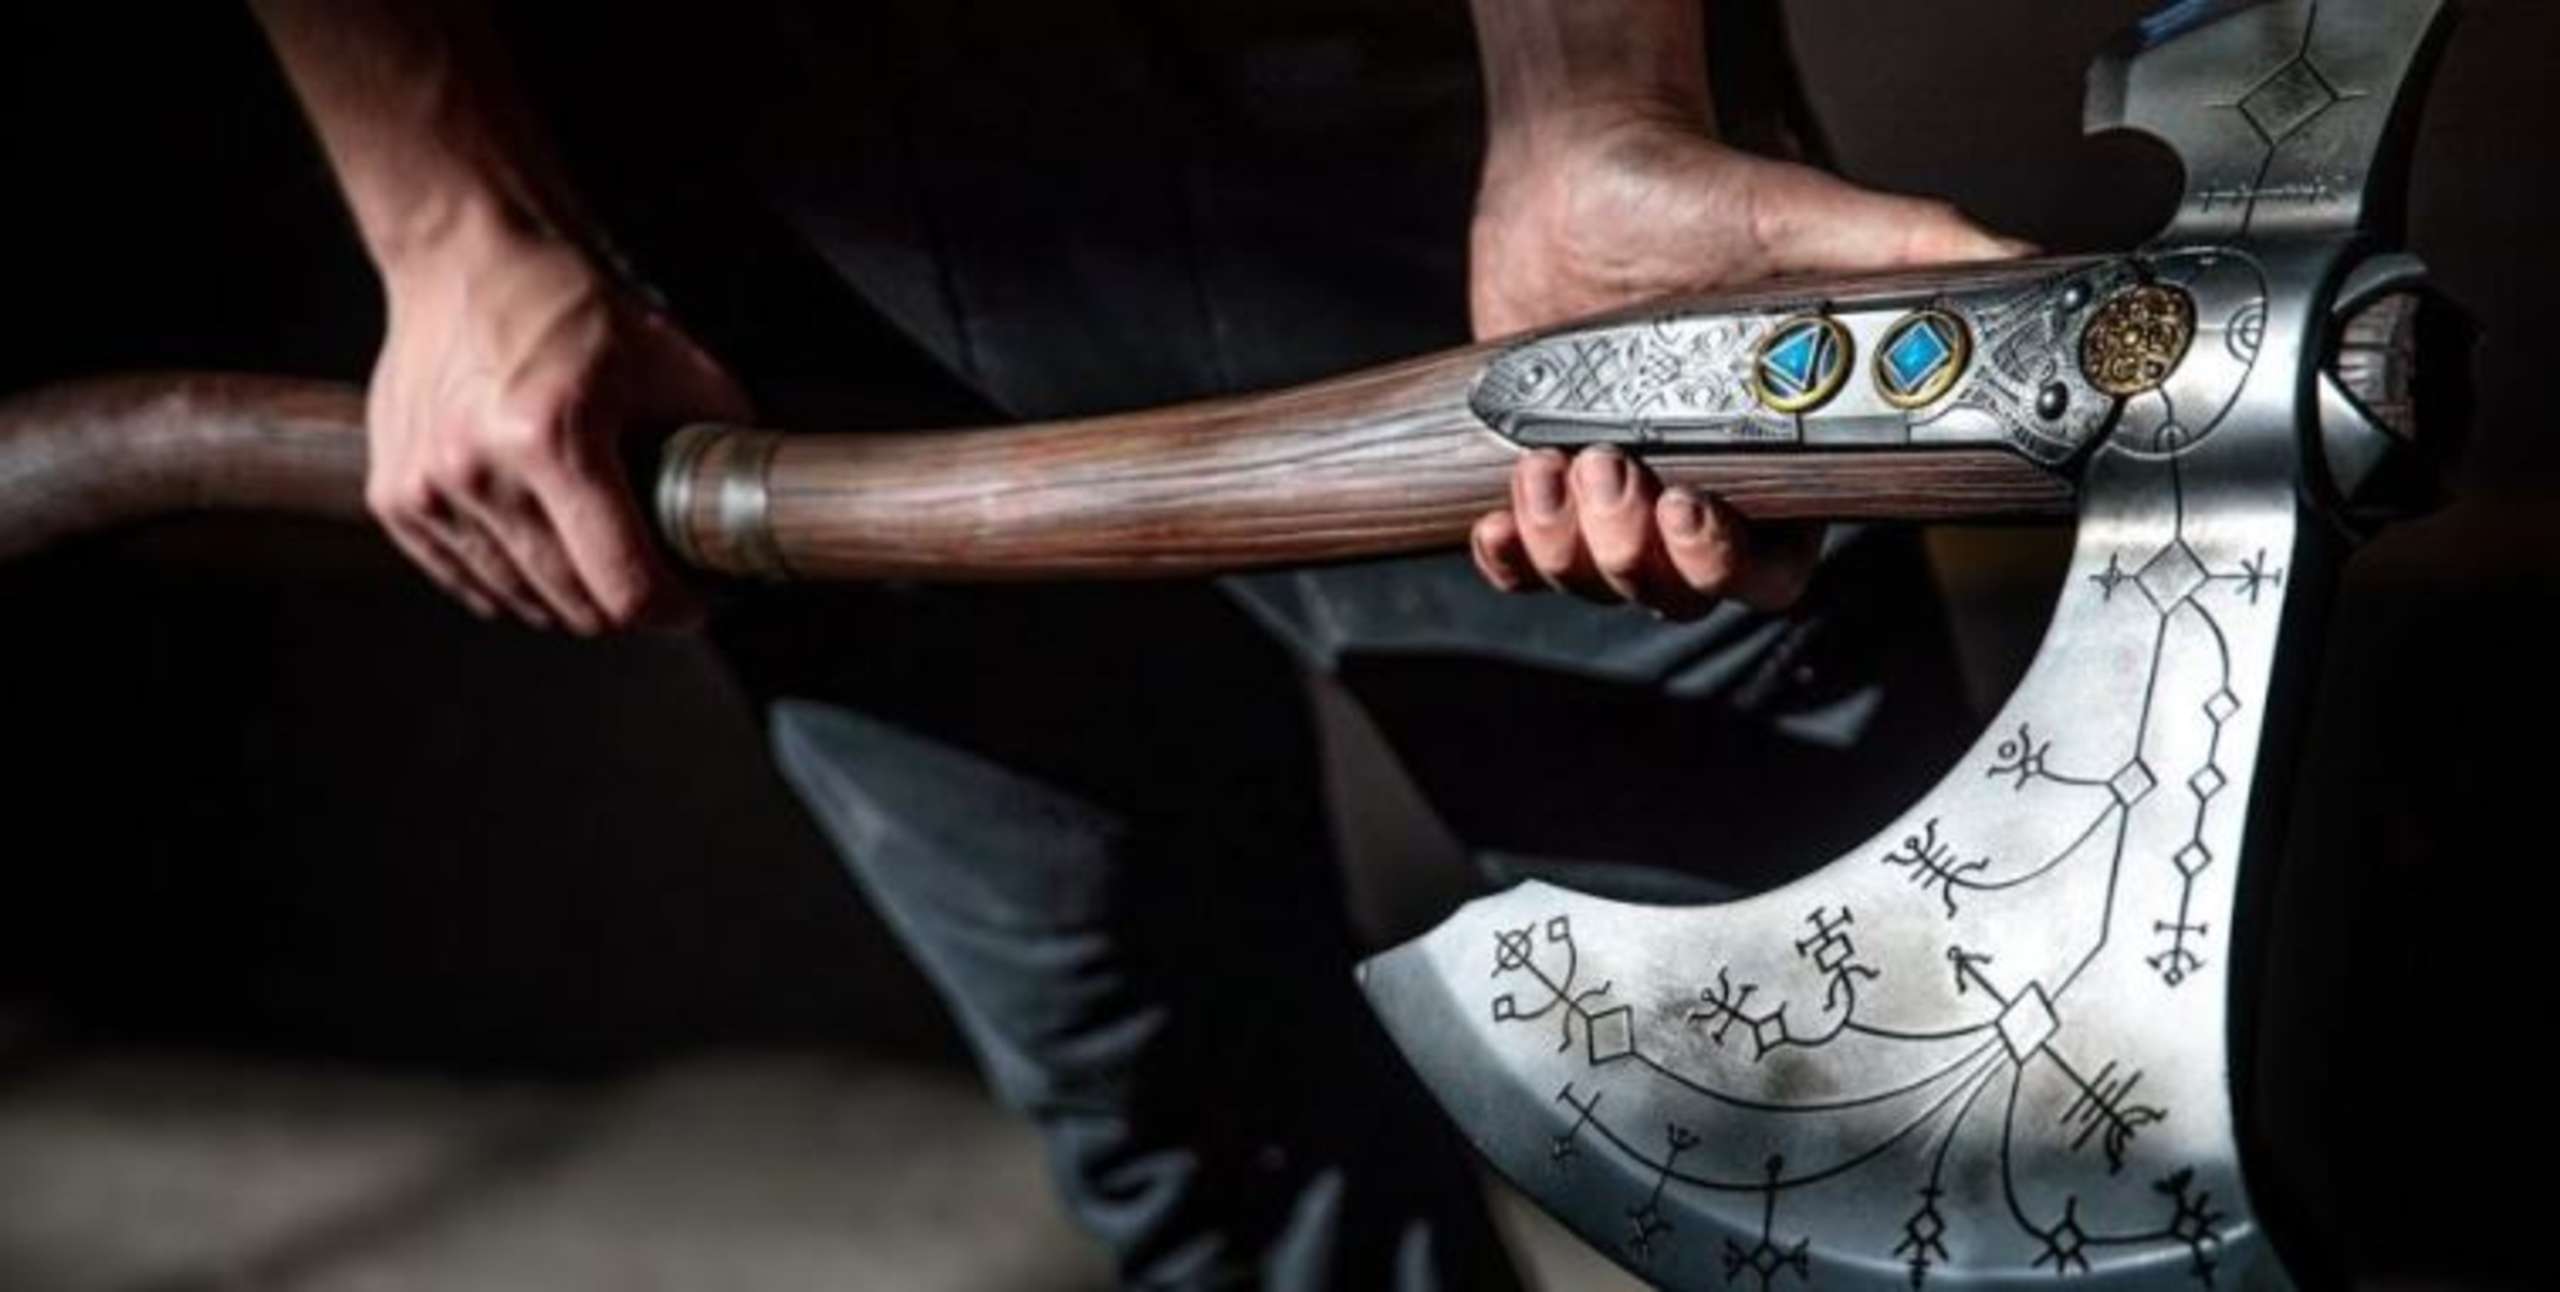 Kratos’ Powerful Leviathan Axe From The Two Most Recent God Of War Video Games Has Been Transformed Into A Gorgeous Lightsaber Hilt By A Devoted Fan